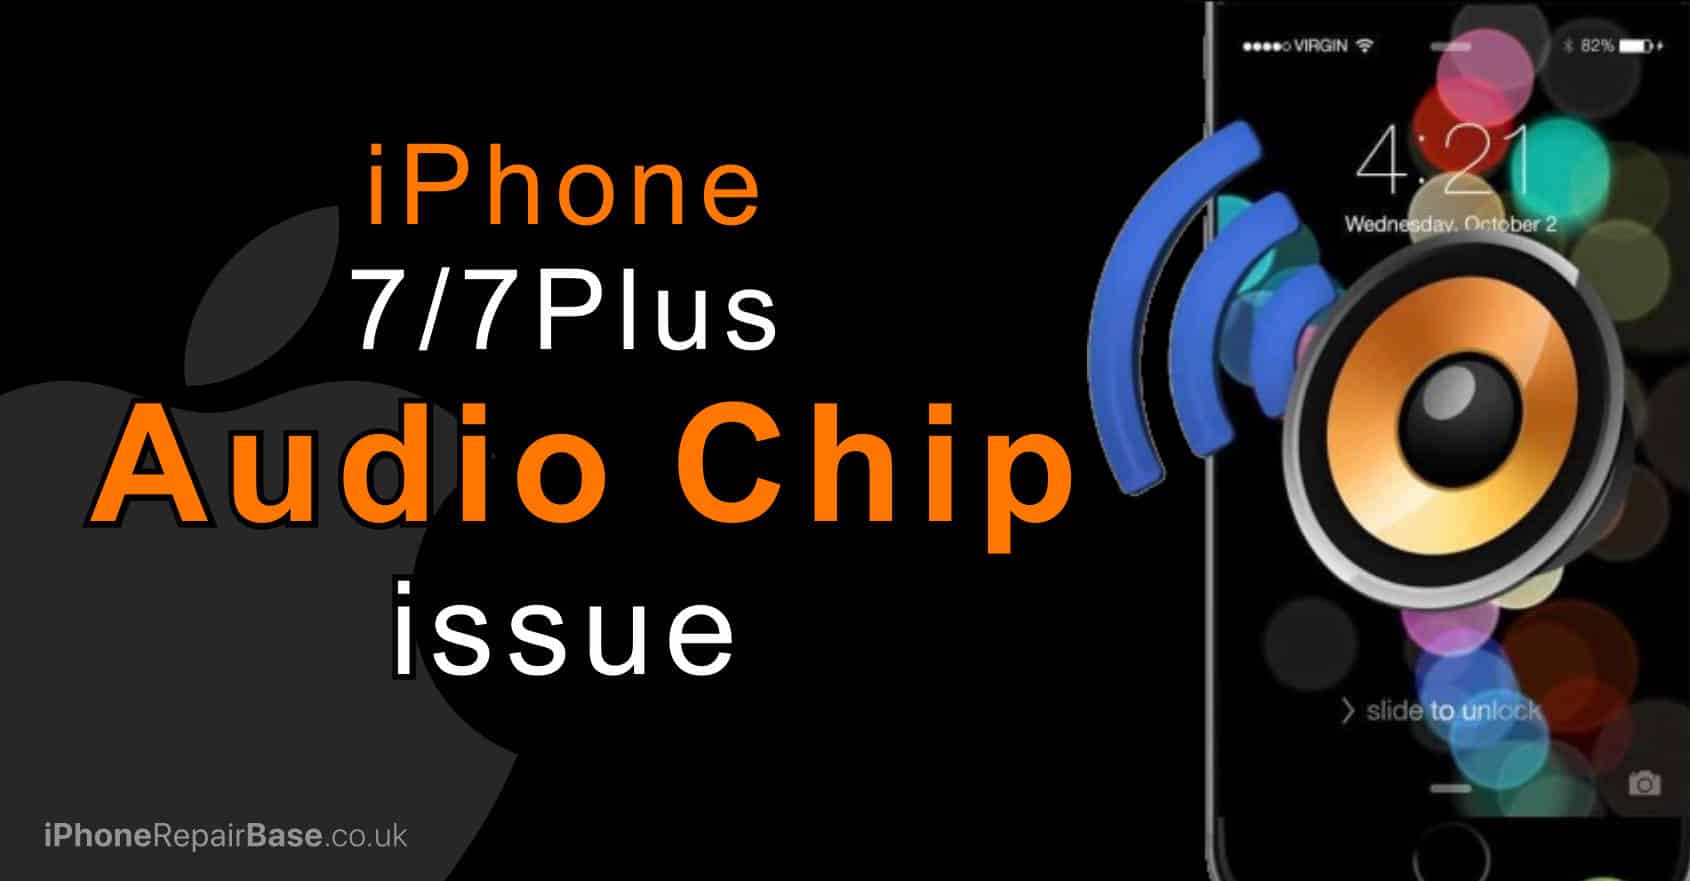 iphone 7 plus audio chip issue no sound, iPhone 7 microphone not working iPhone 7 no sound on calls iPhone 7 audio not working on calls iPhone 7 bottom microphone not working where is the microphone on an iPhone 7 apple iPhone 7 sound problems iPhone 7 loudspeaker not working on calls iPhone 7 plus loudspeaker greyed out iPhone 7 microphone and speaker not working iPhone 7 microphone and speaker not working during calls my iPhone 7 speaker and microphone not working apple iPhone 7 microphone and speaker not working